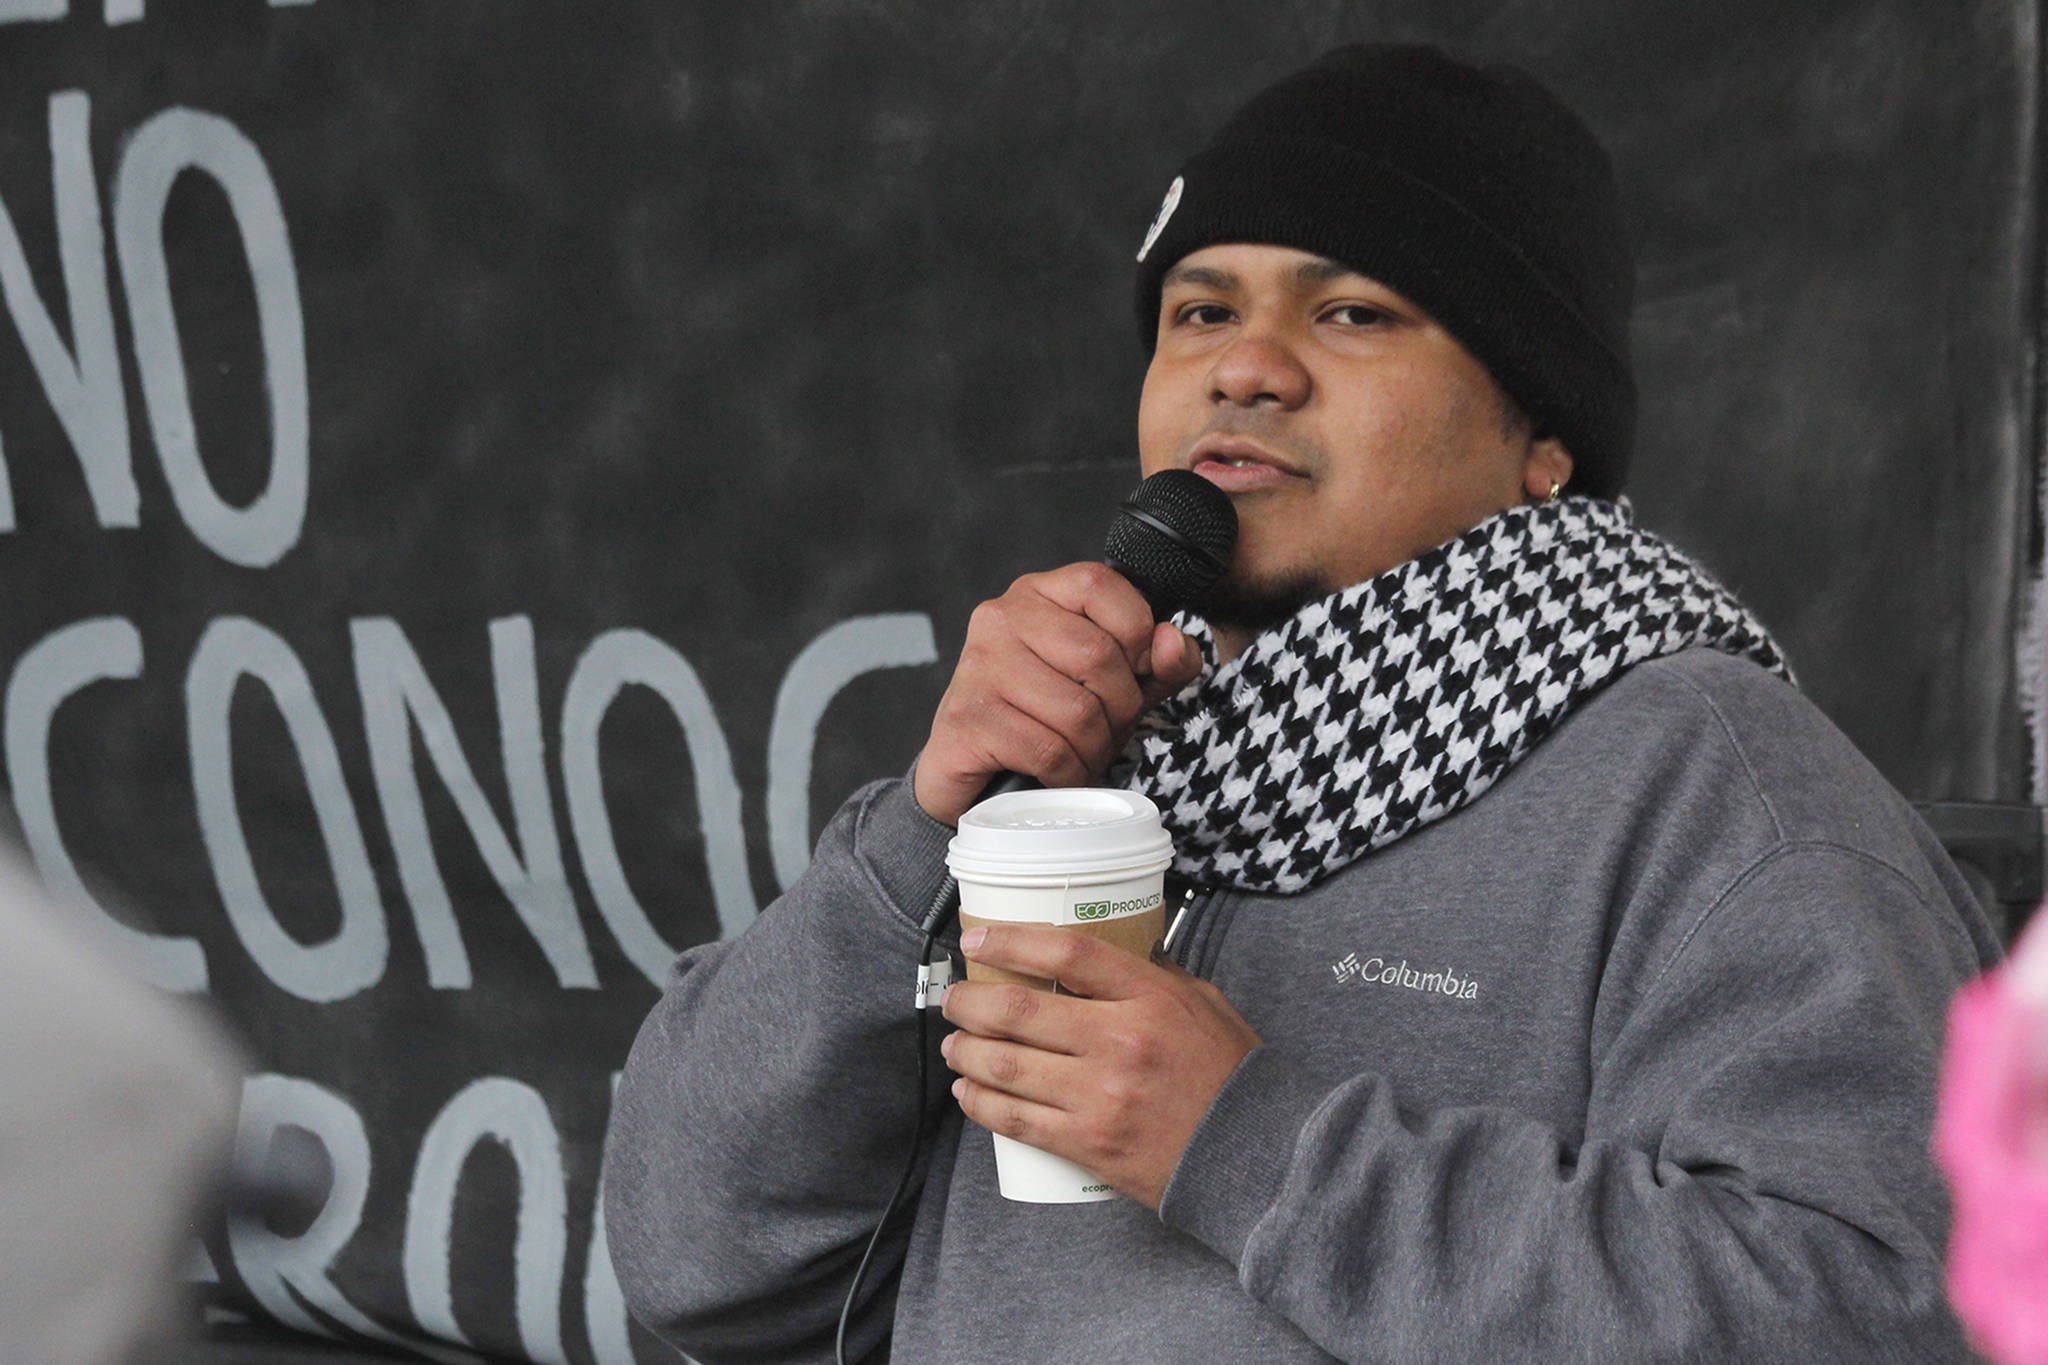 Manni Guillen, whose family moved to Juneau from Mexico when he was a baby, speaks at the Love Knows No Borders rally in Juneau on Saturday, Dec. 15, 2018. Guillen spoke about his experiences growing up in Juneau and working with the Border Angels nonprofit. (Alex McCarthy | Juneau Empire)